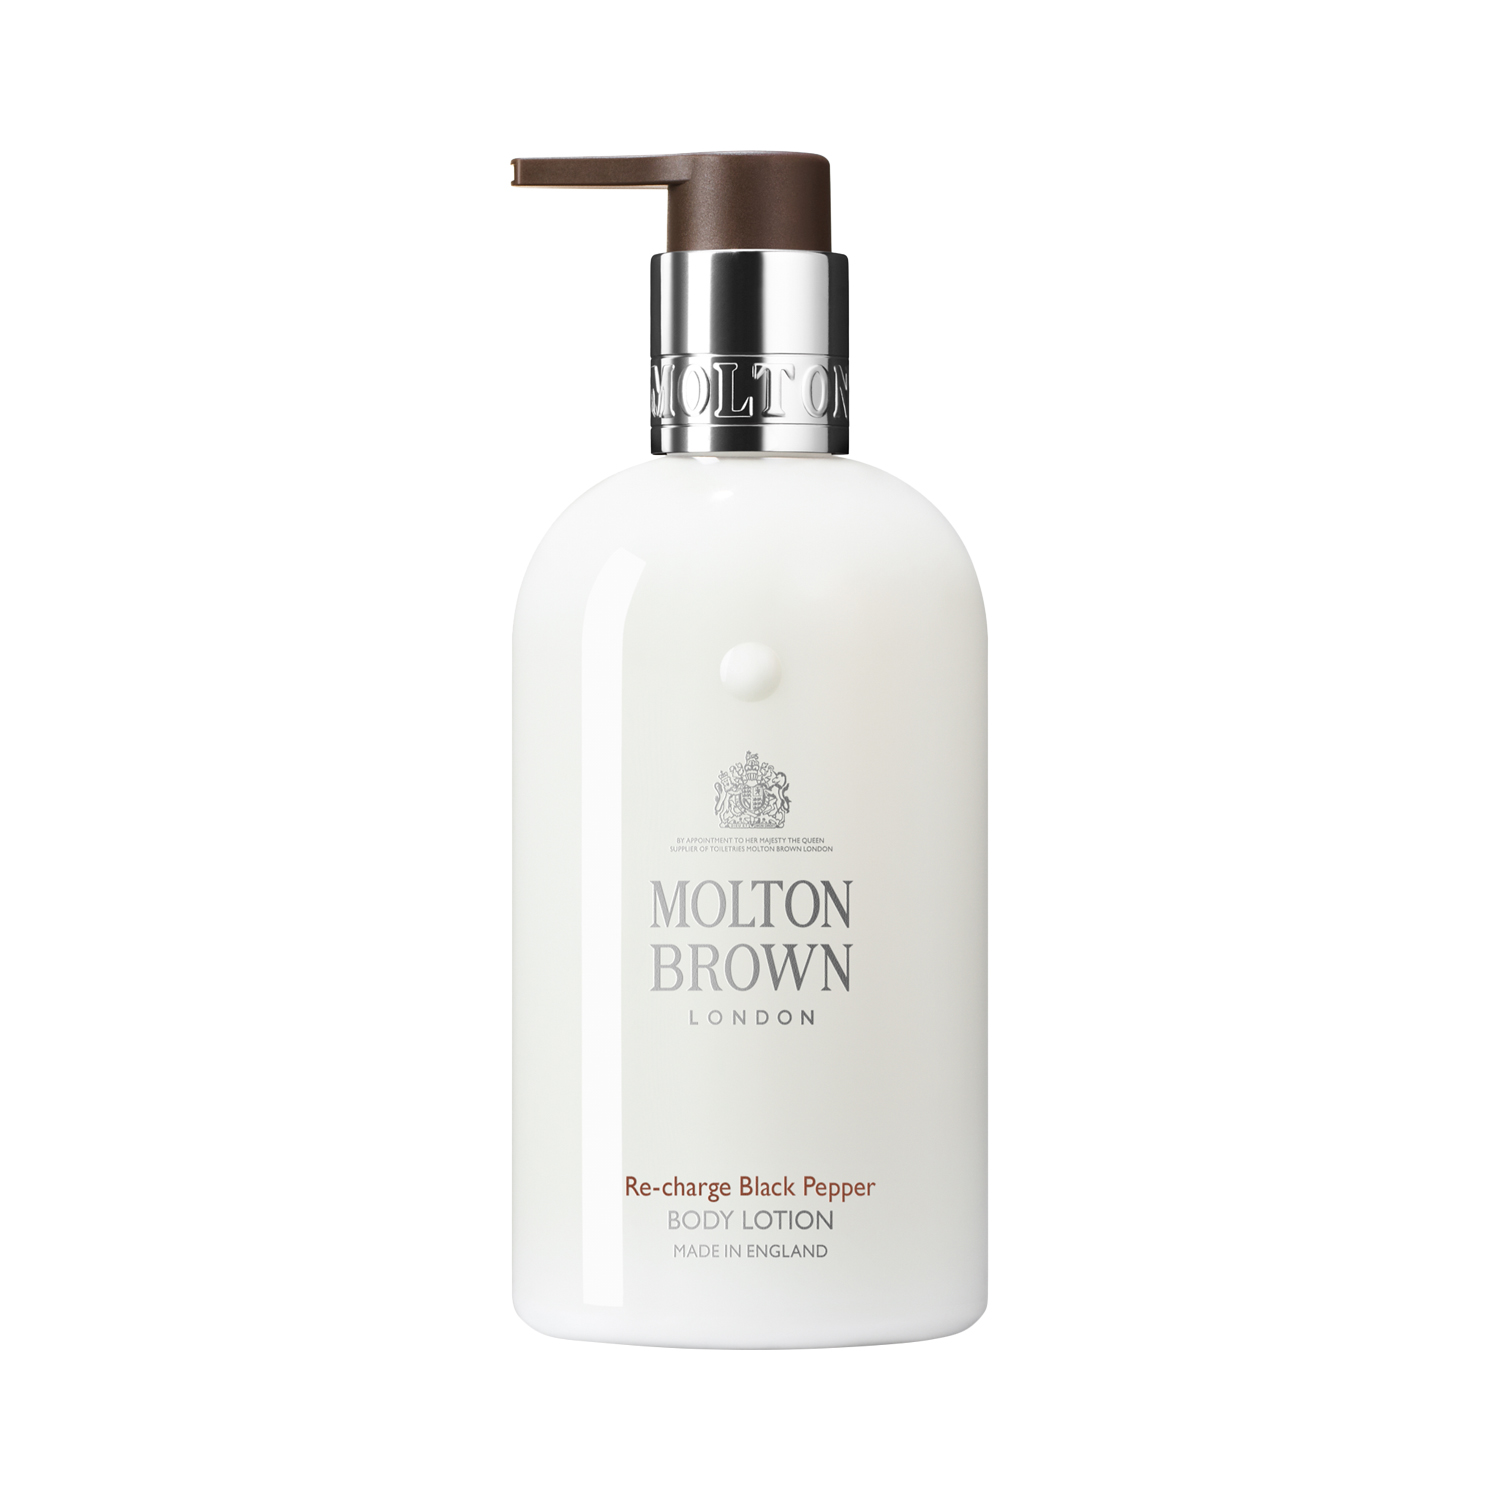 Molton Brown - Re-charge Black Pepper Body Lotion